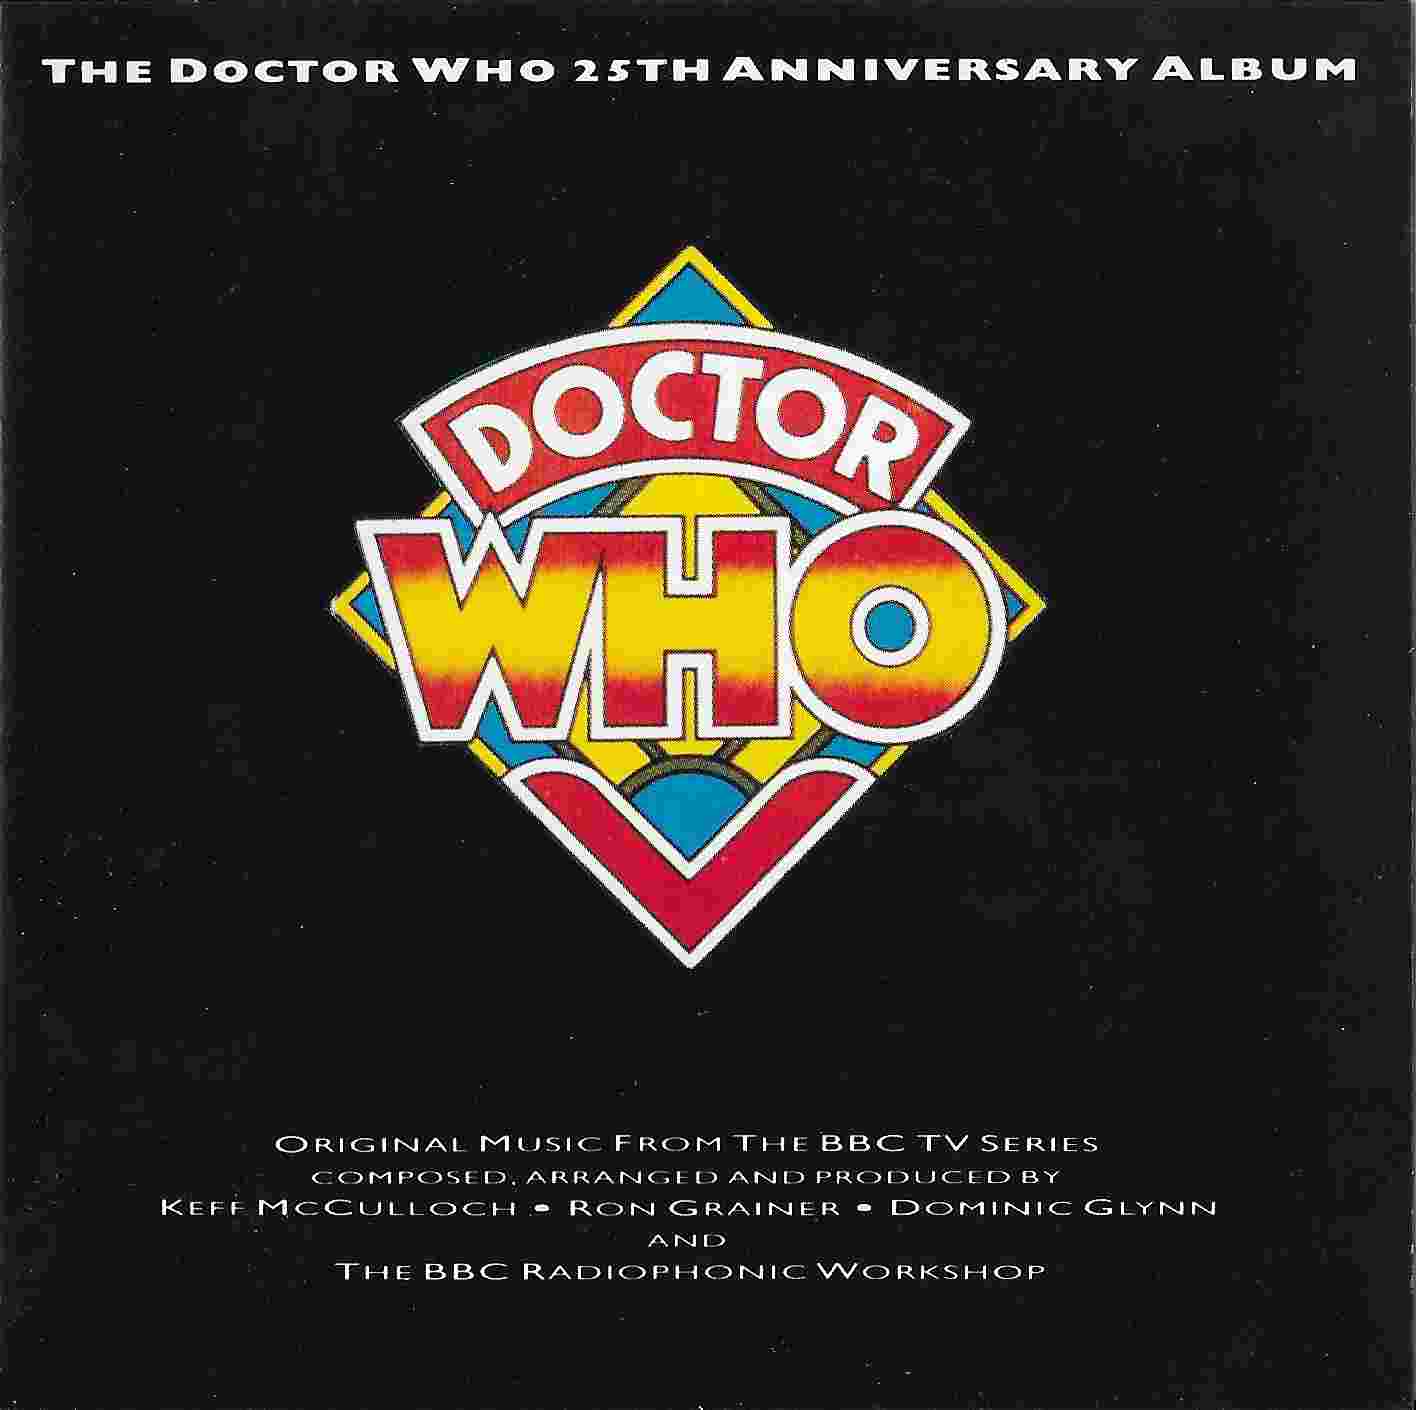 Picture of BBCCD707 Doctor Who - 25th anniversary album by artist Ron Grainer / Dominic Glynn / Keff McCulloch from the BBC records and Tapes library